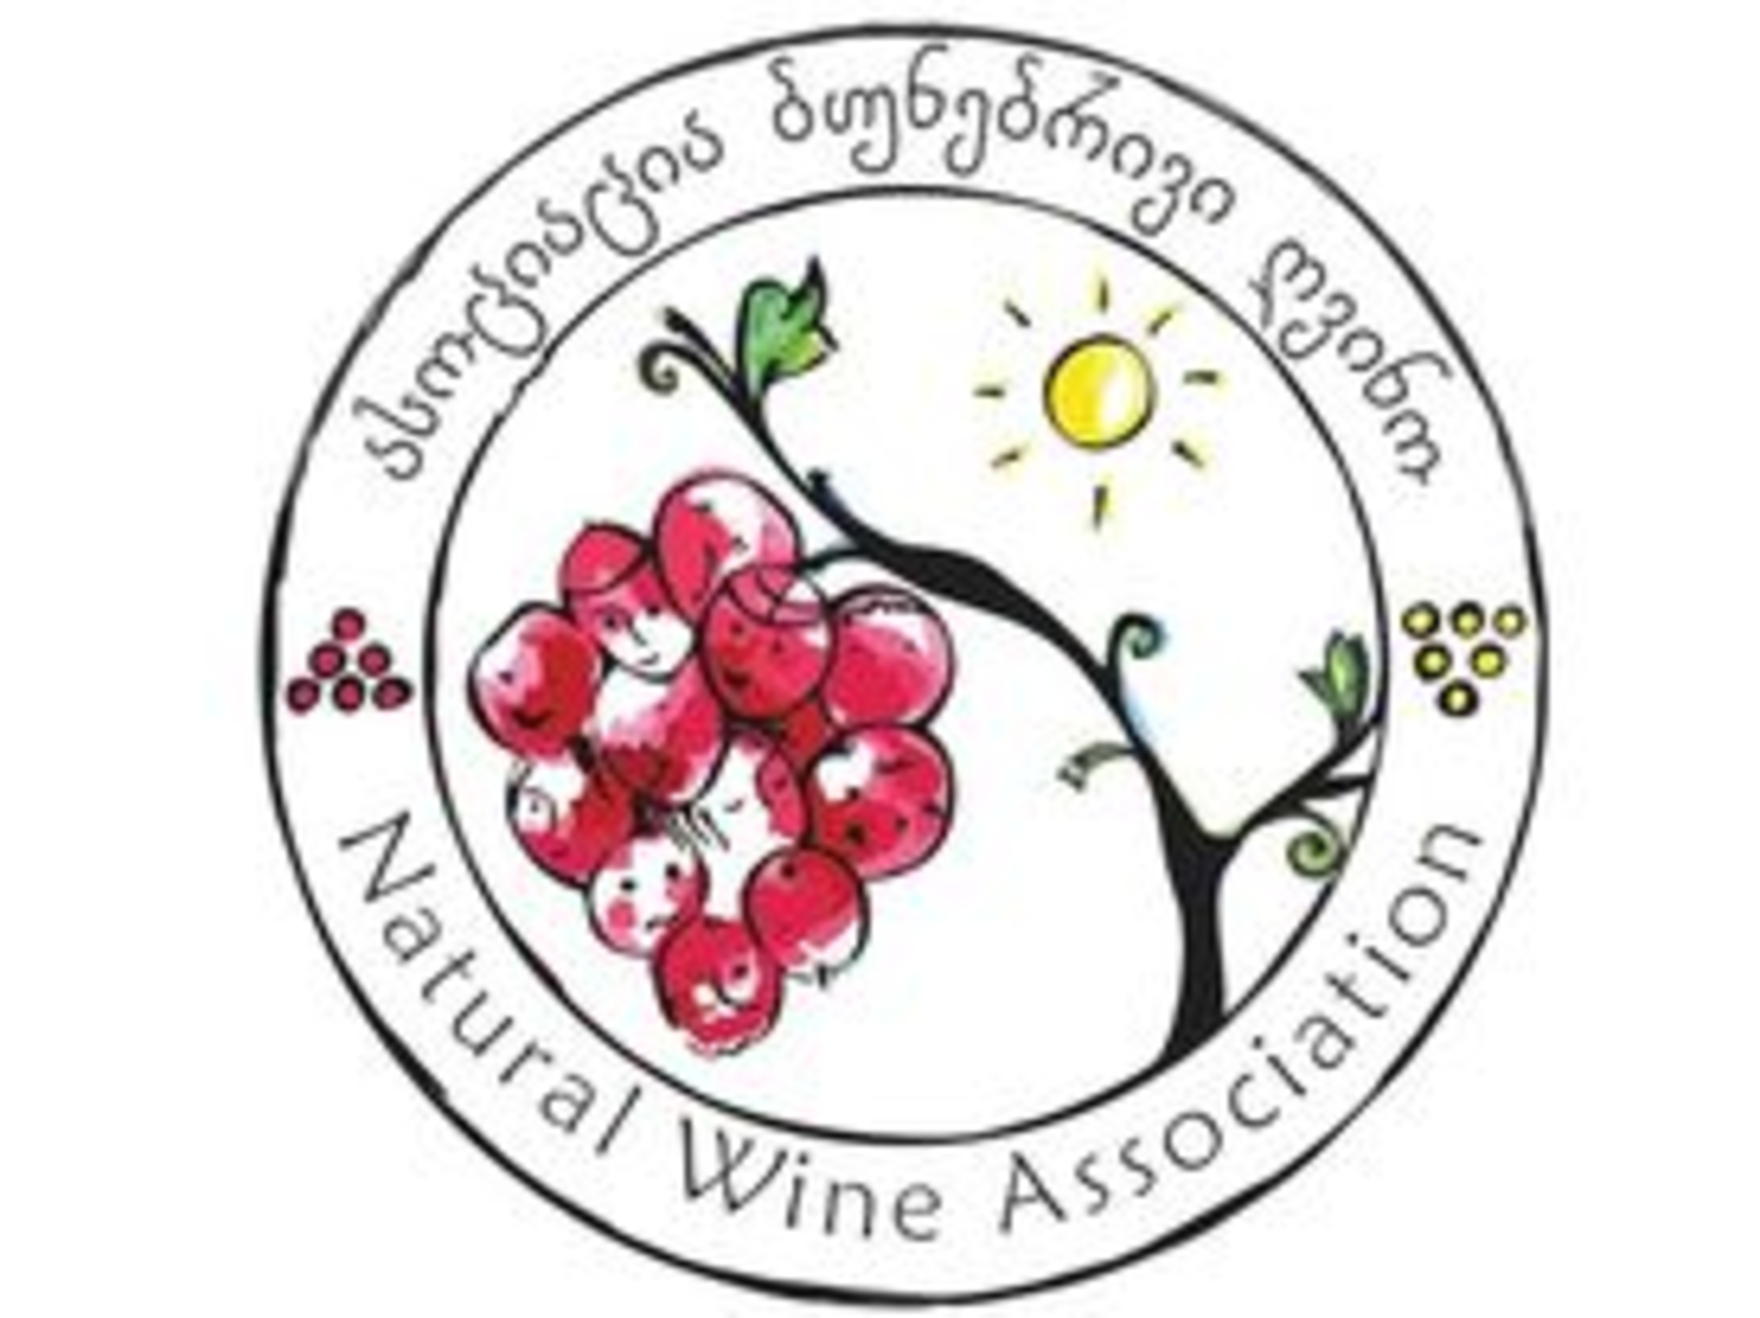 16 new wineries join the Natural Wine Association